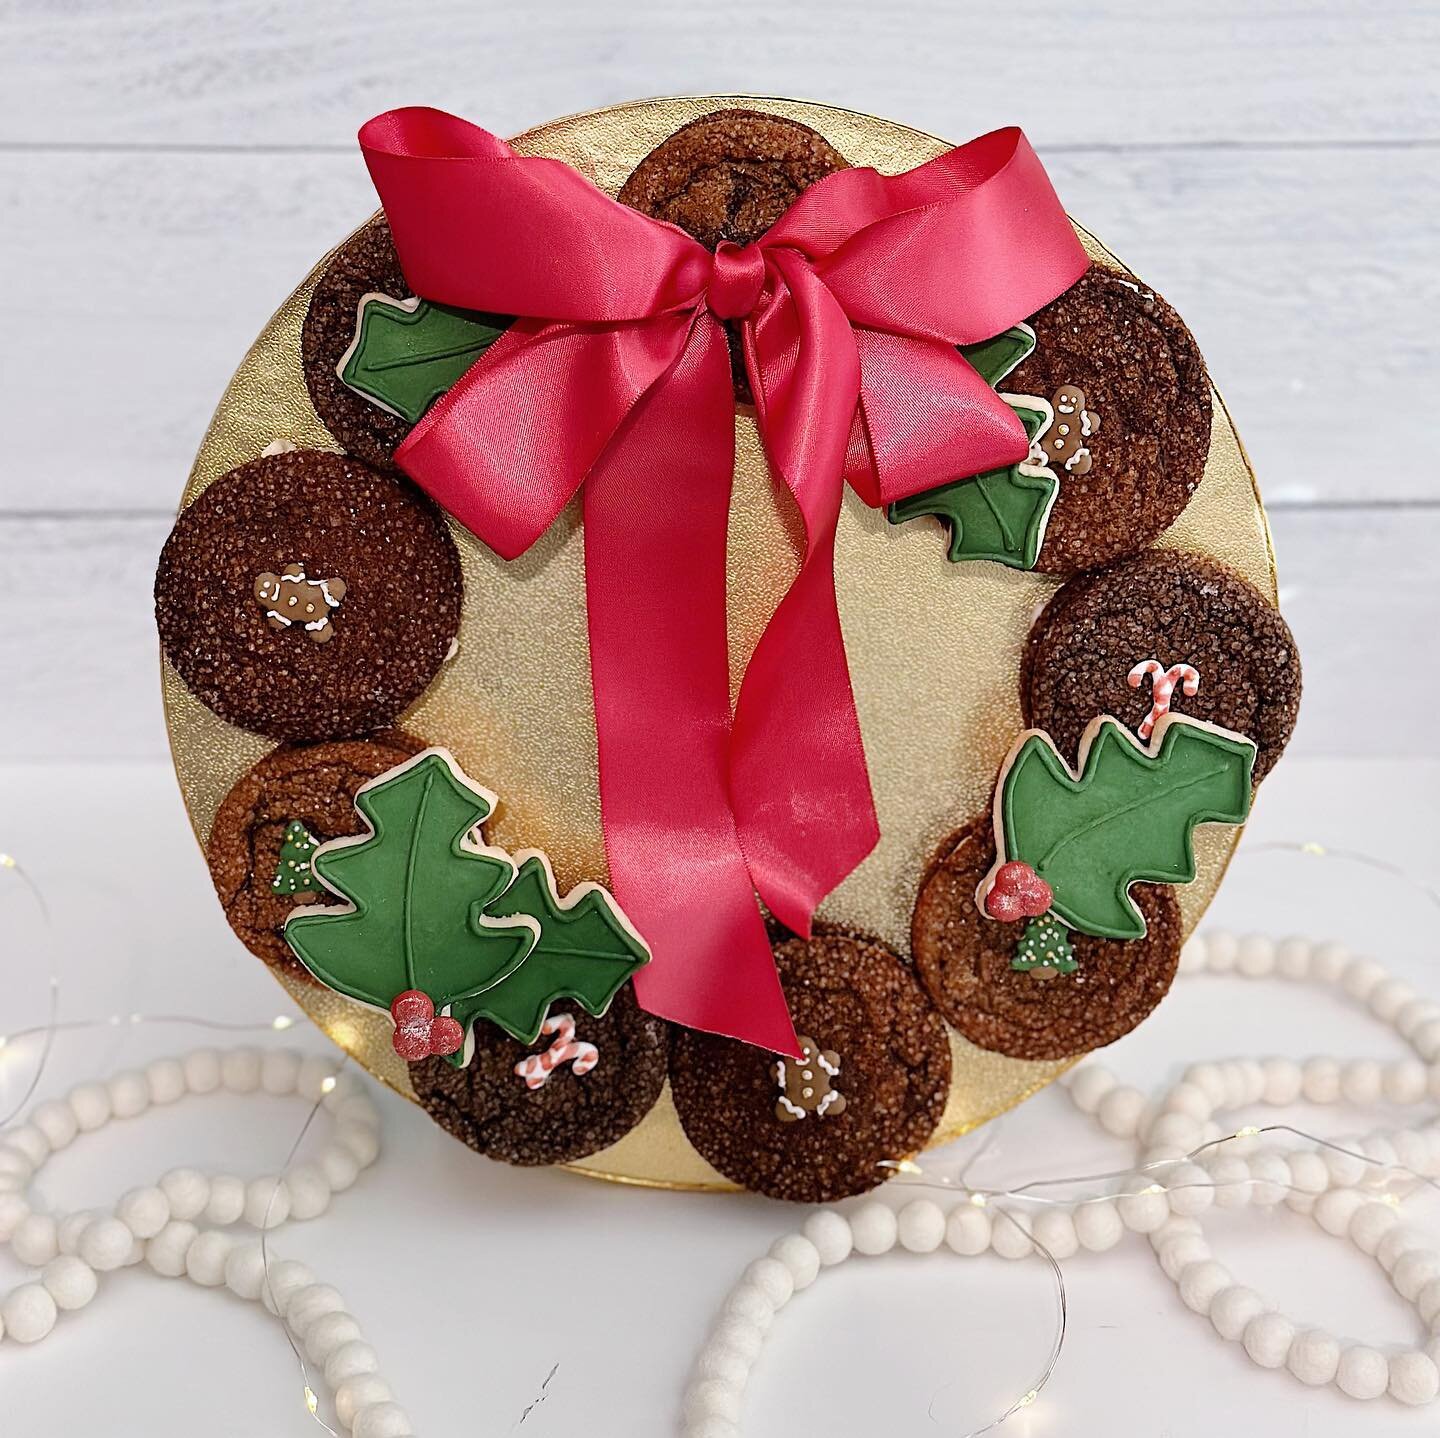 Just couldn&rsquo;t wait any longer to share the first of my Christmas Pop-Up offerings with you all! COOKIE WREATHS!!! You all have shown so much love for my sandwich cookies this year that I thought it was only right to center one of my Christmas b